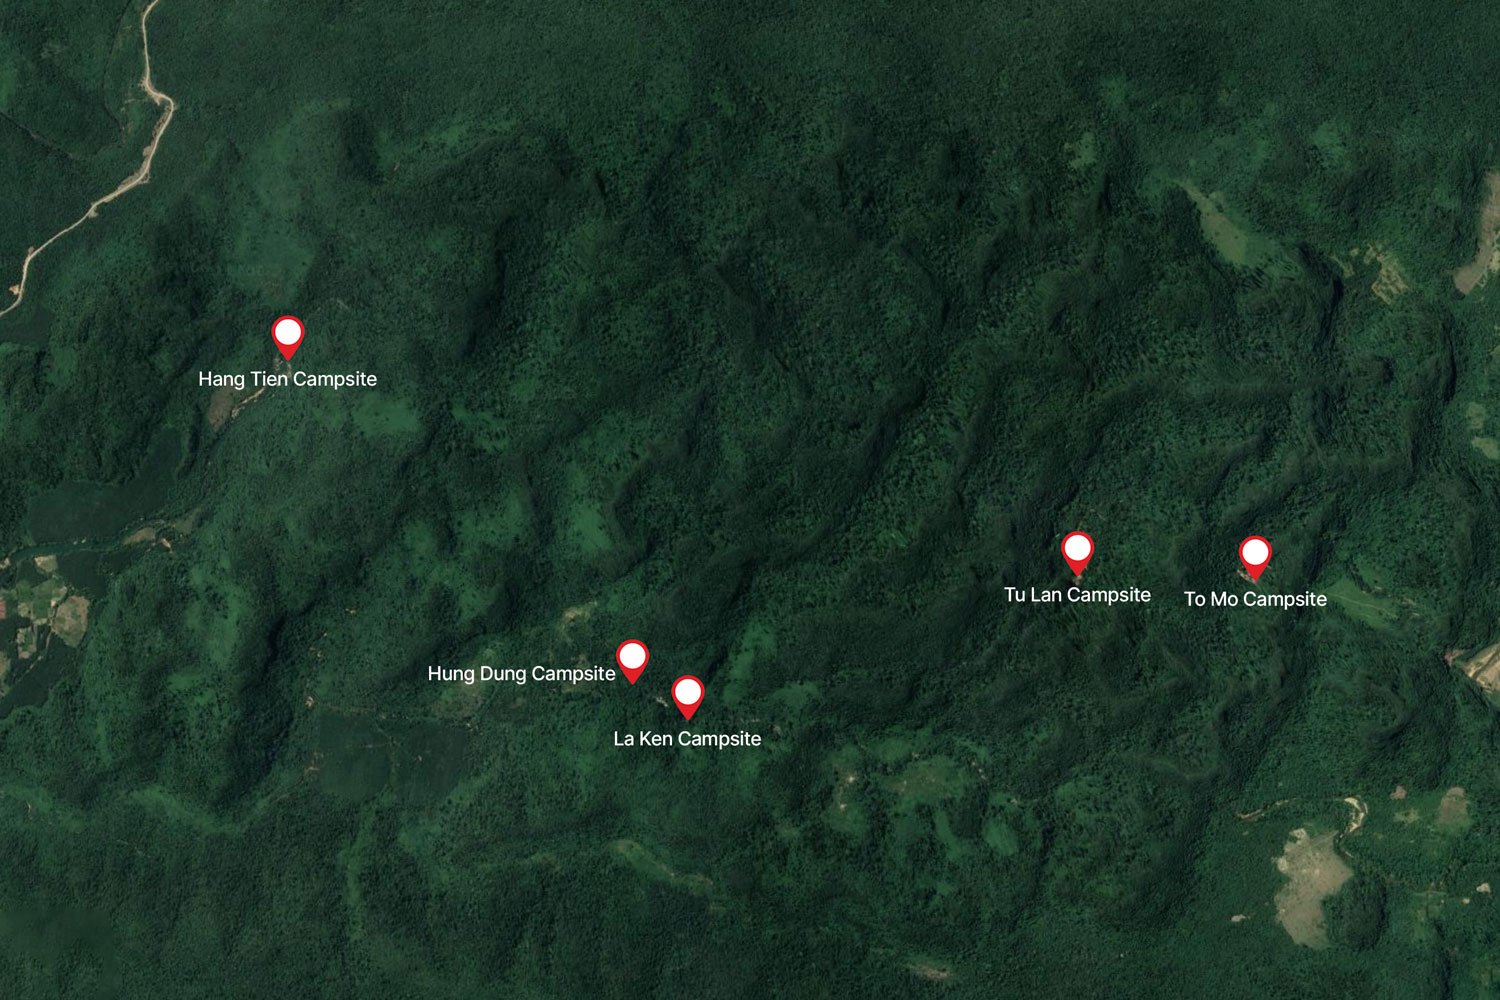 The location of campsites at Tu Lan Cave System.